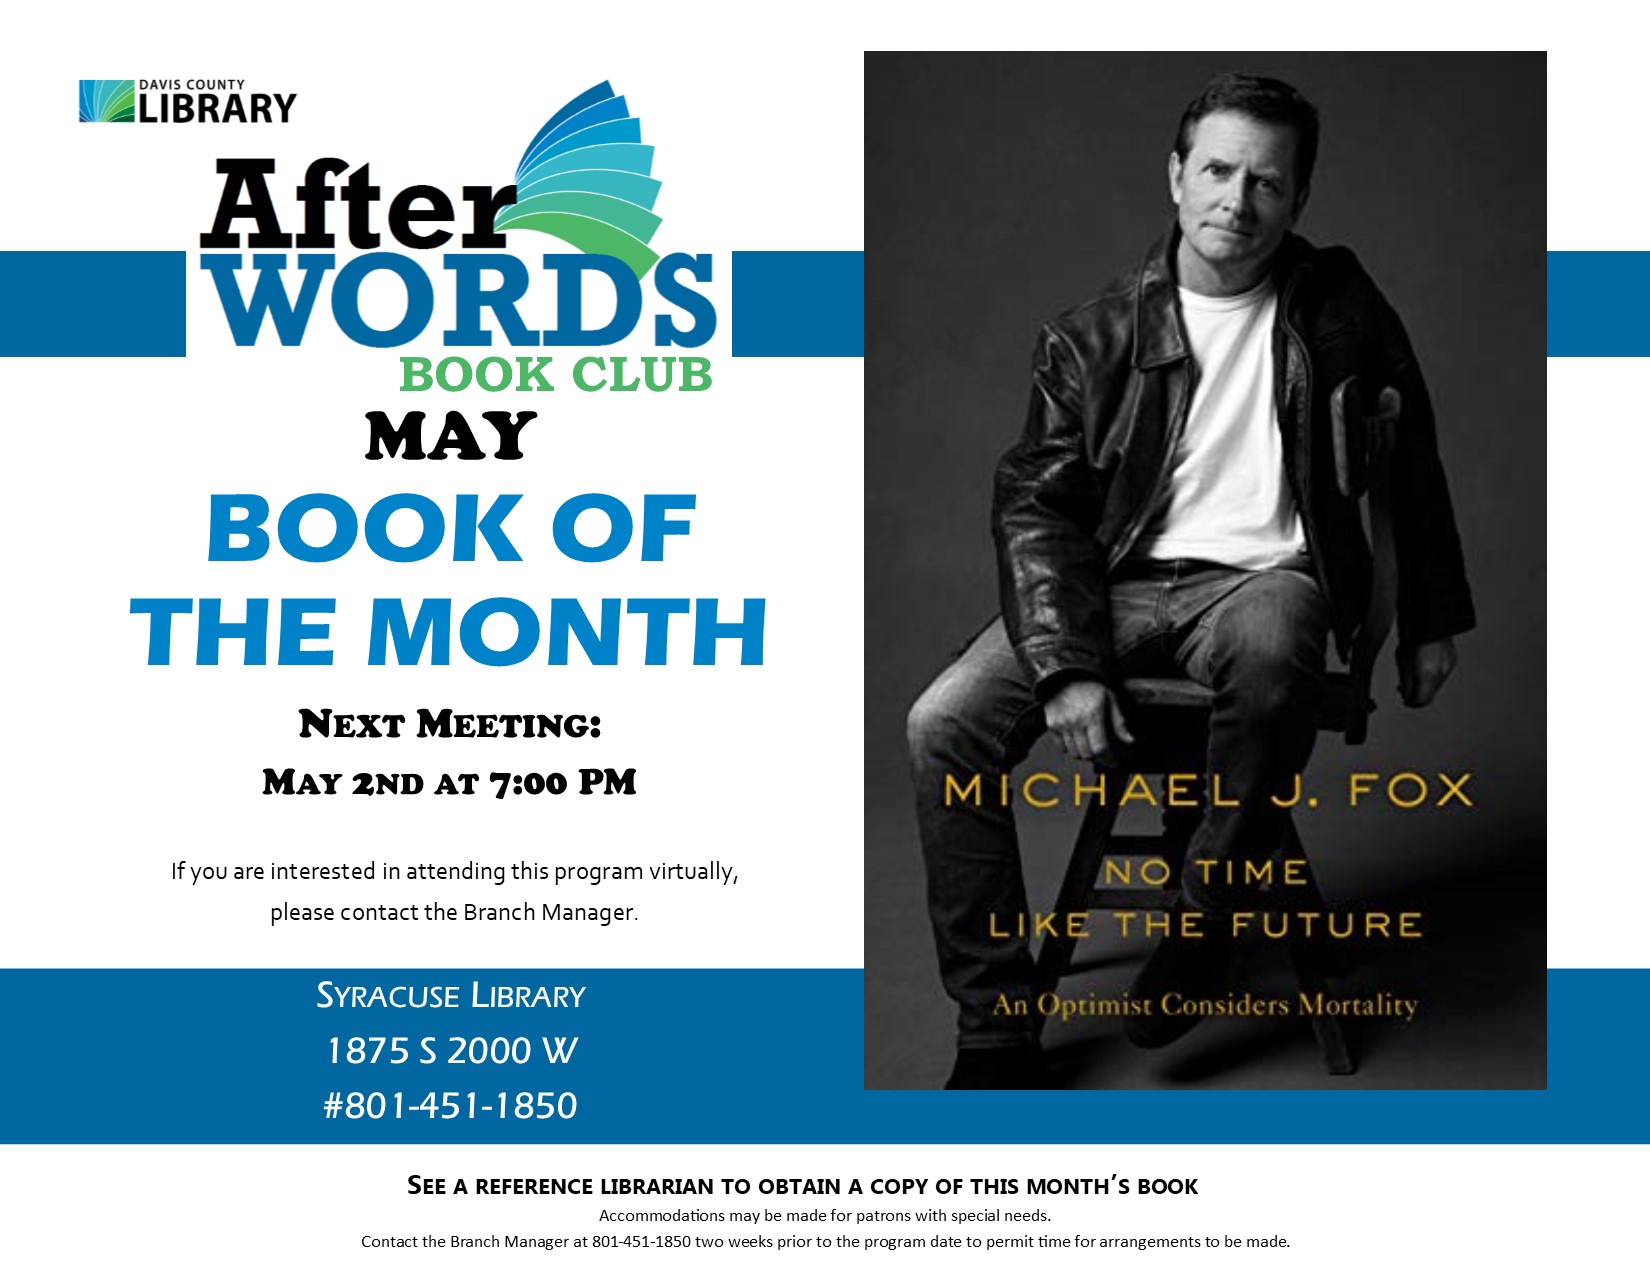 After Words Book Club @ 7pm No Time Like the Future by Michael J. Fox